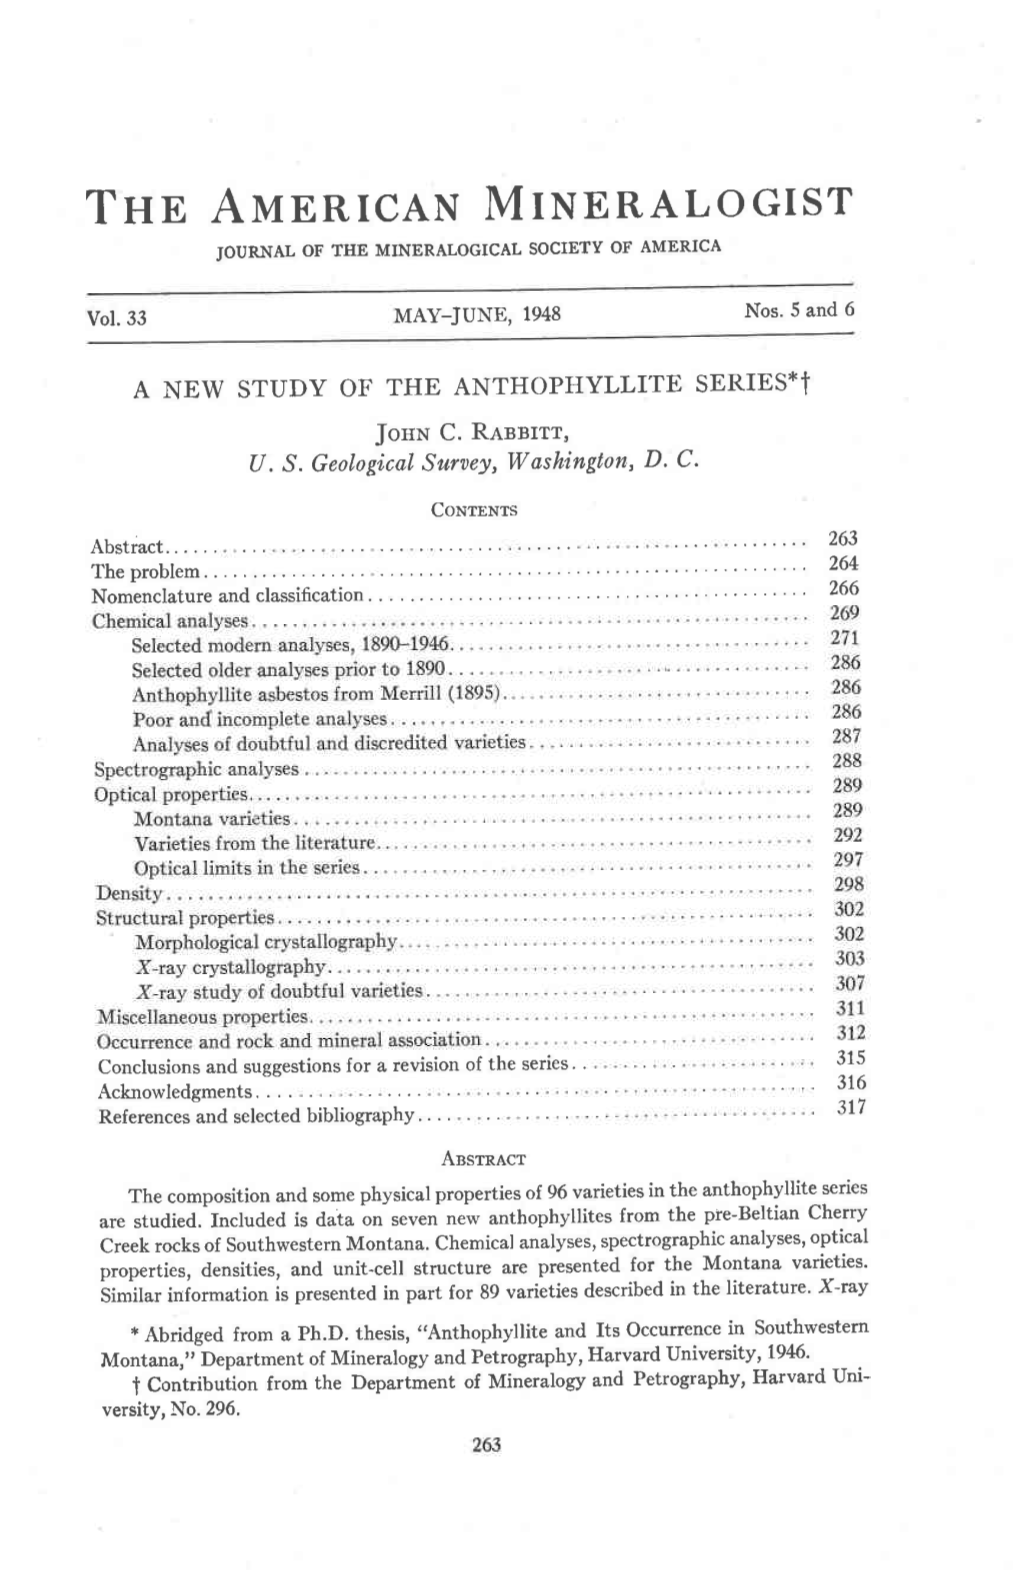 Thn AUERICAN Mtl,Ieralogist of AMERICA JOURNAL of the MINERALOGICAL SOCIETY